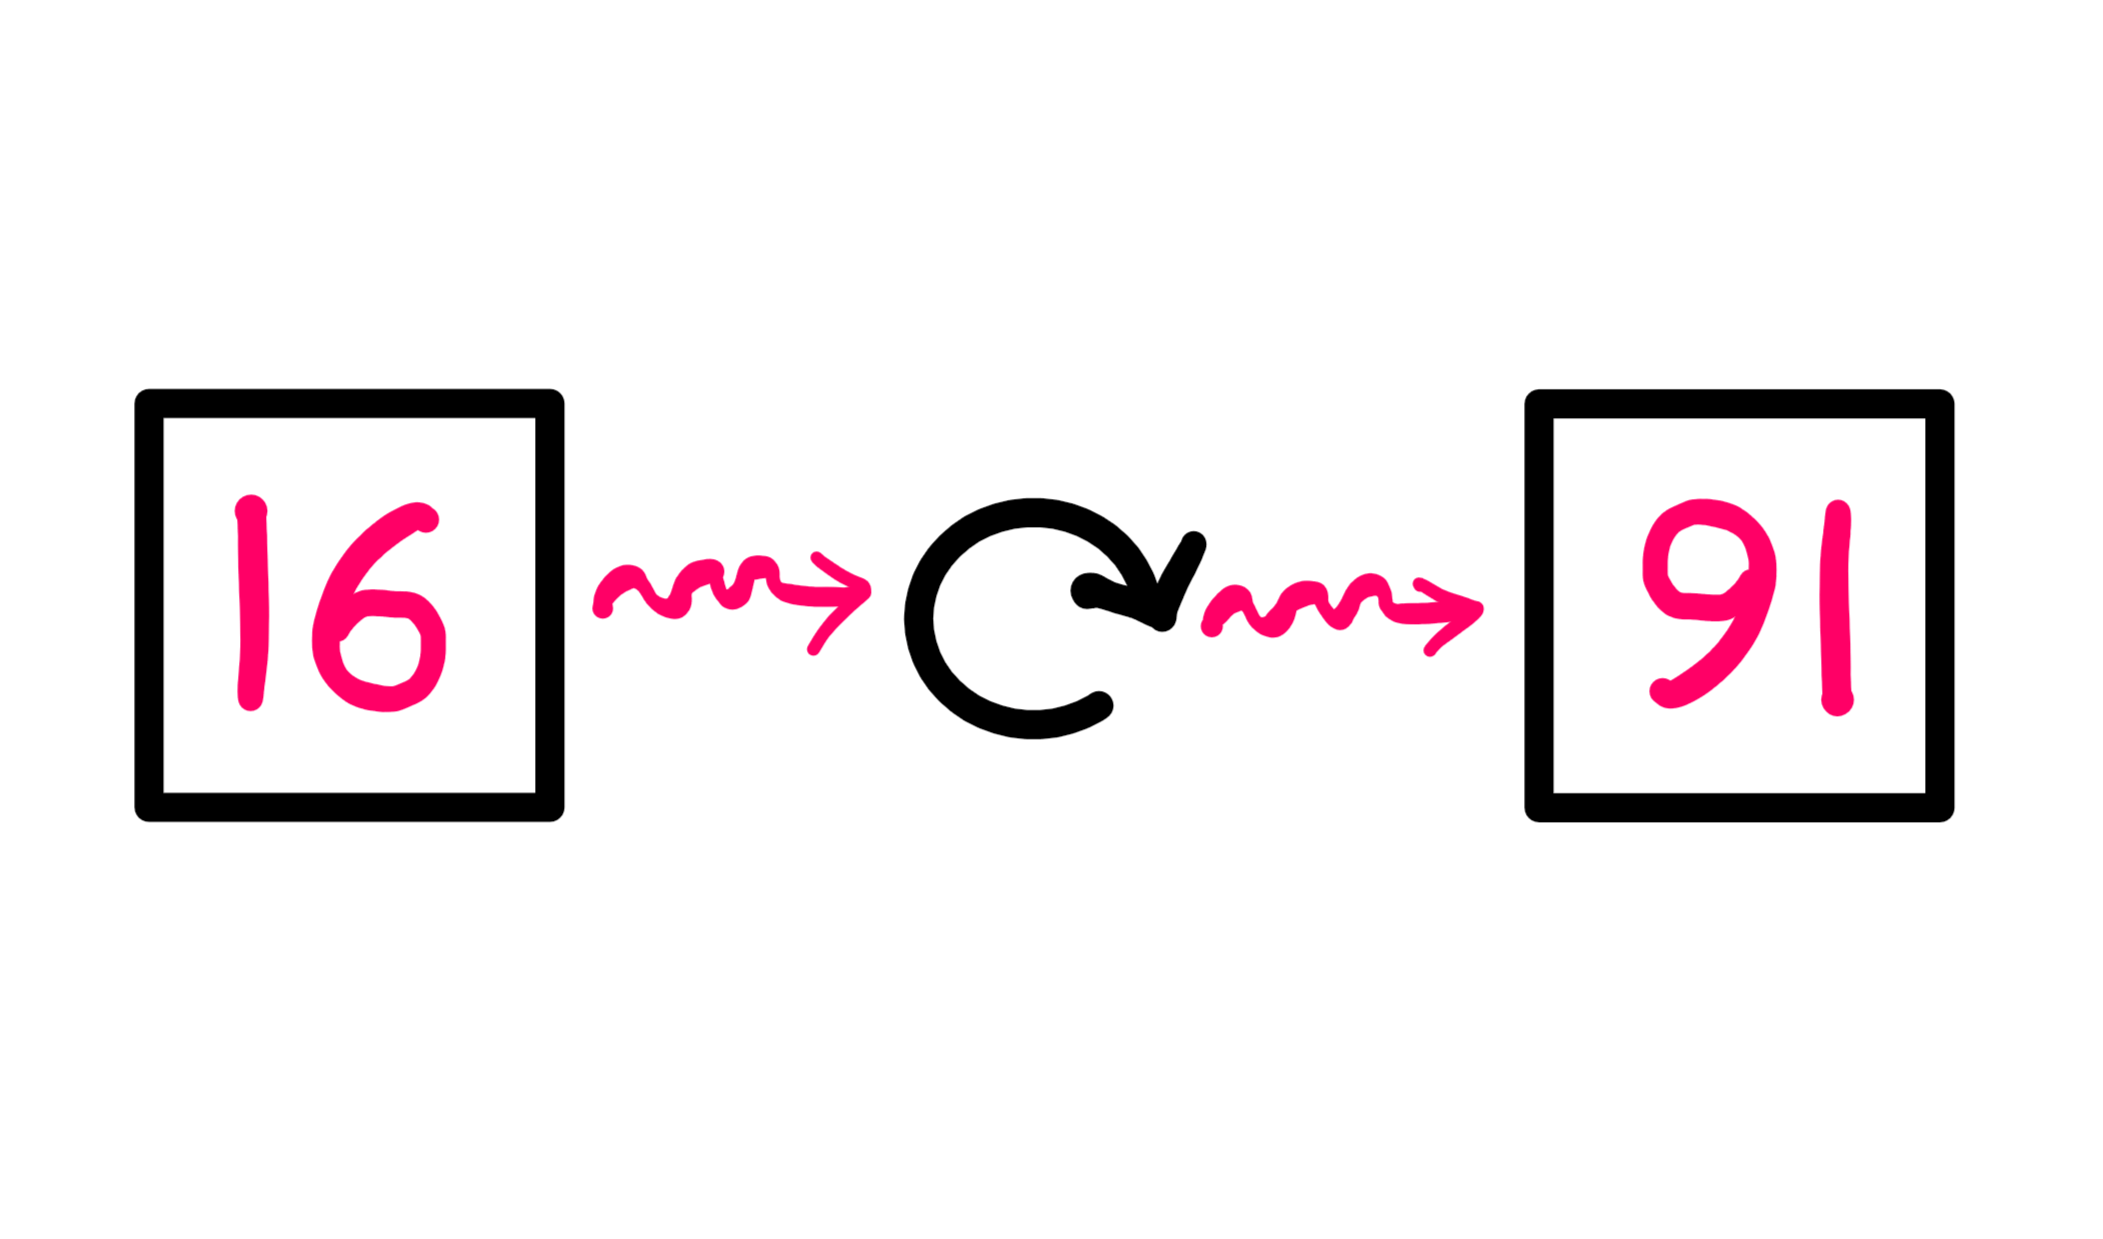 The Story Of The Banned Numbers - A whiteboard graphics style image showing the number 16 written in pink inside a black box on the left. This box and number combination is copied and rotated 180 degrees on the right to represent 91.